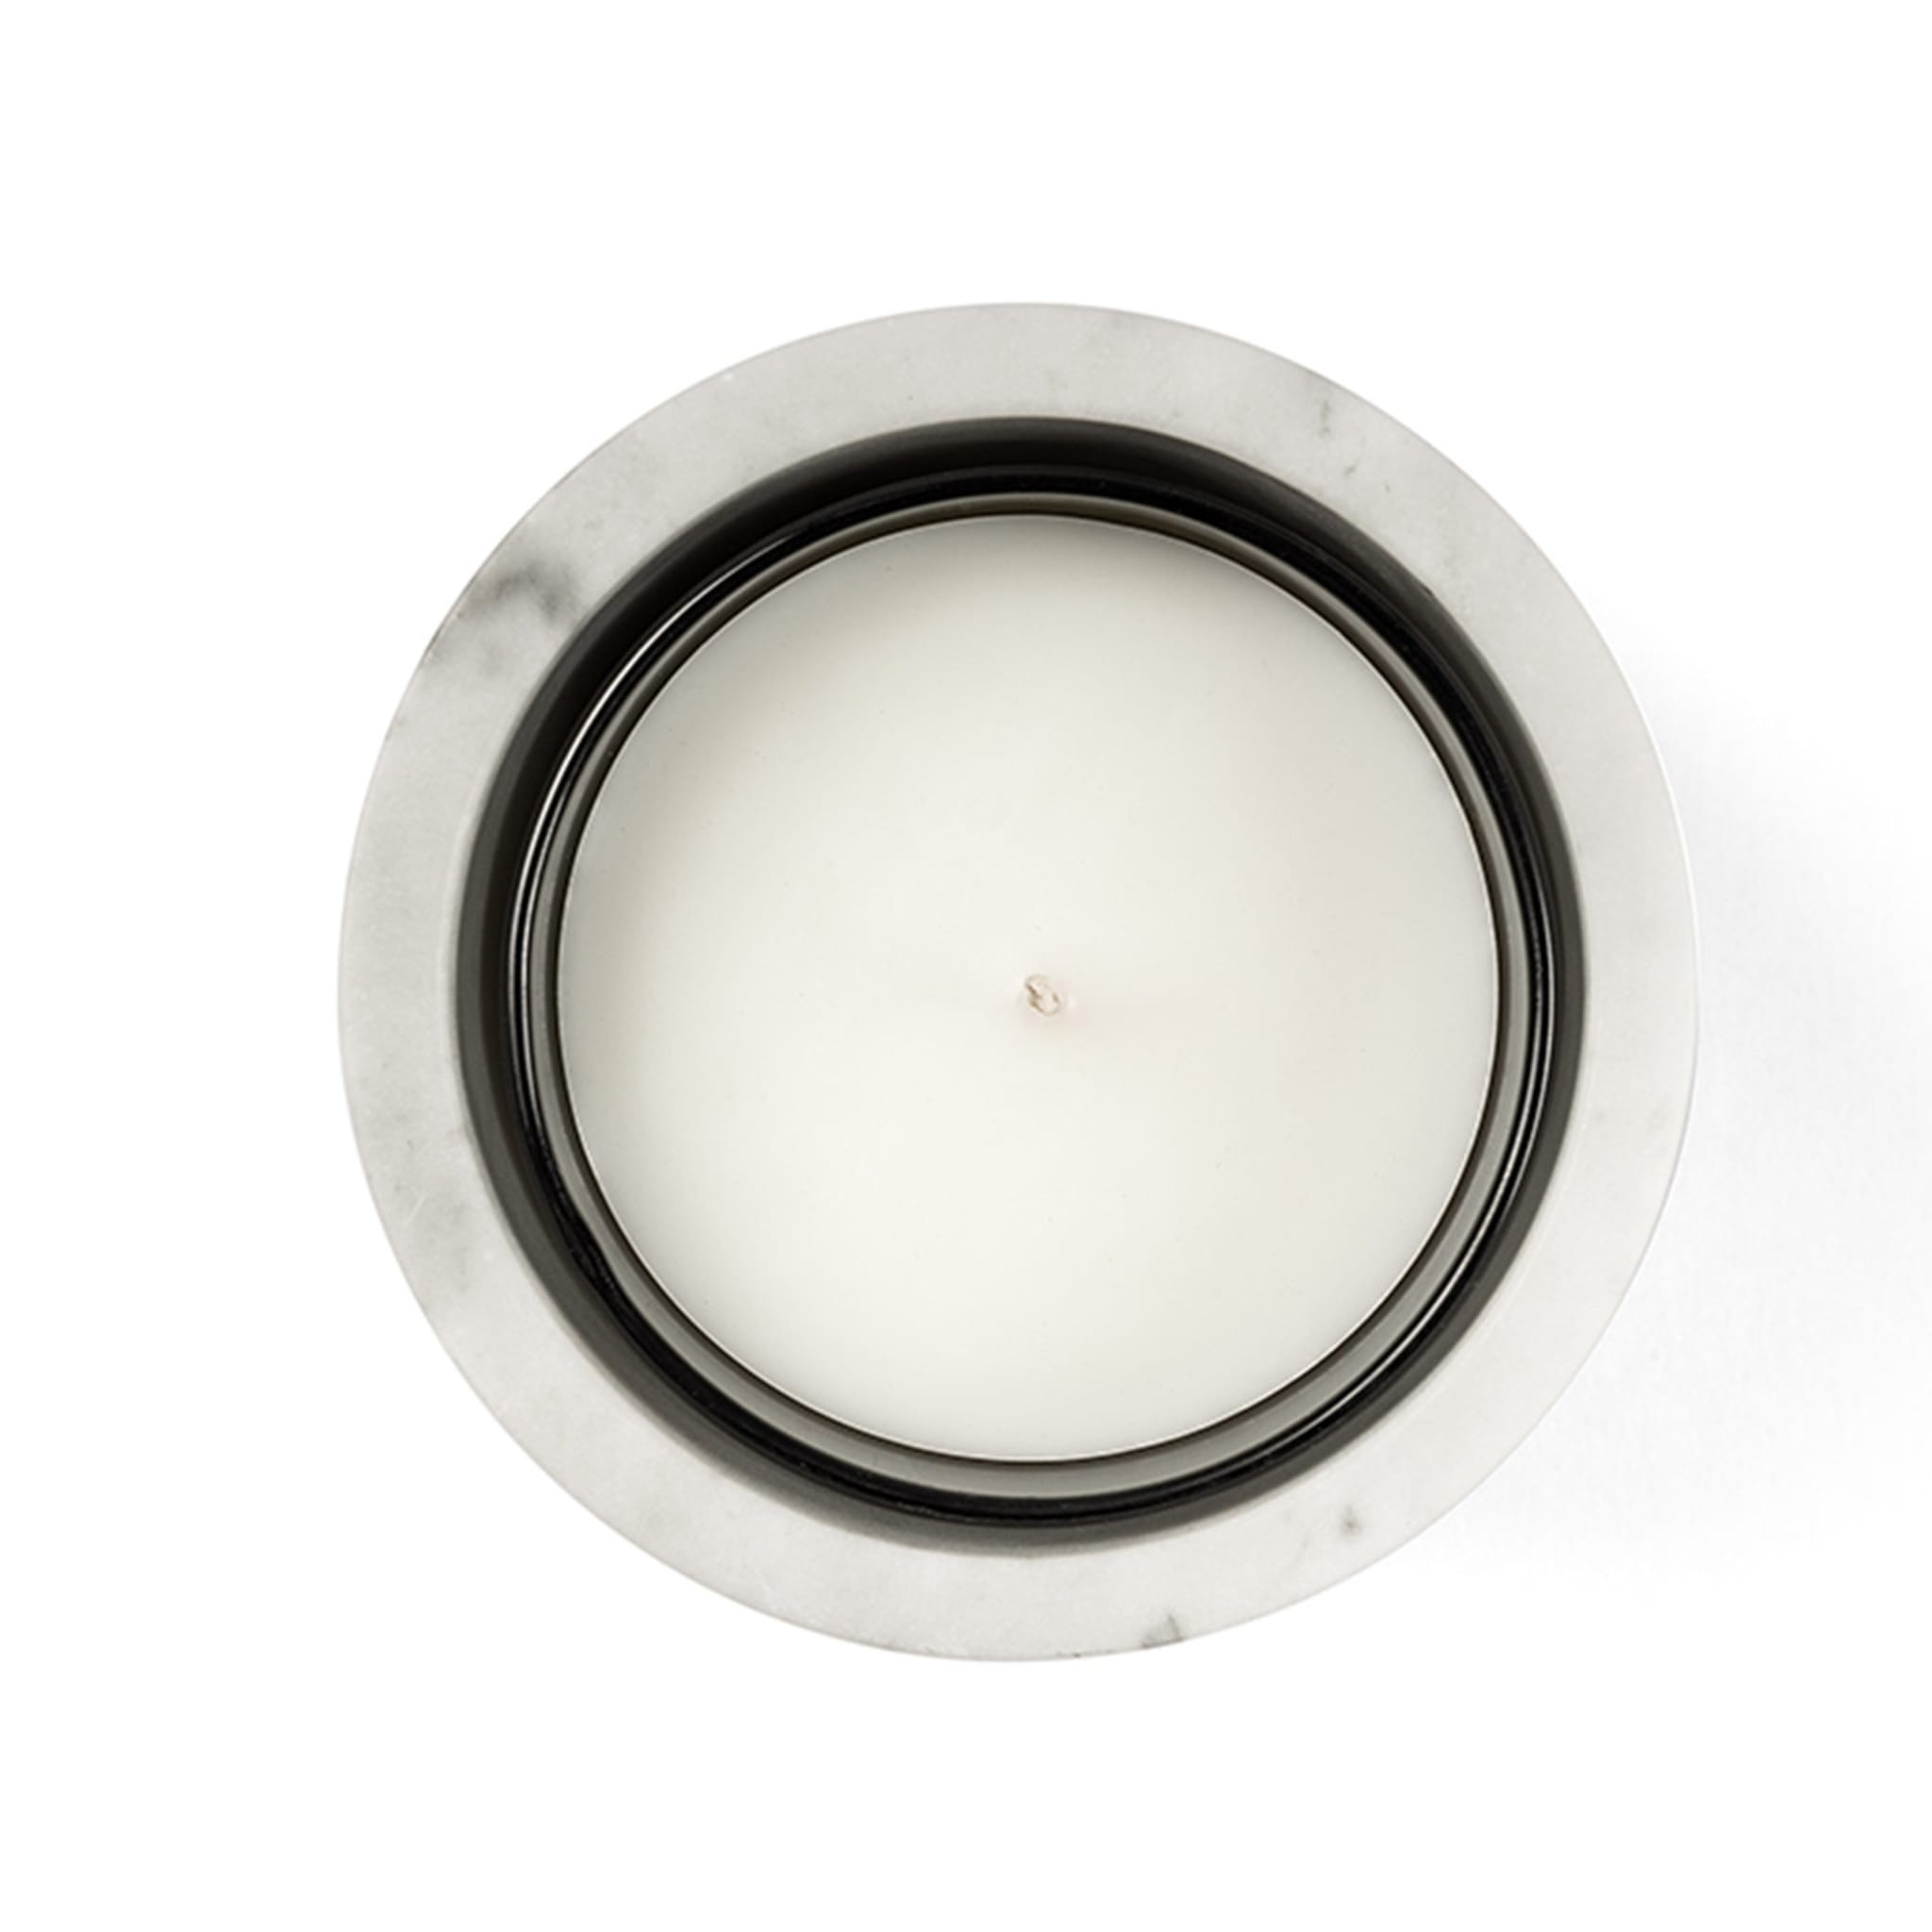 Pietra L11 Candle Holder in Bianco Carrara Marble - Alternative view 1